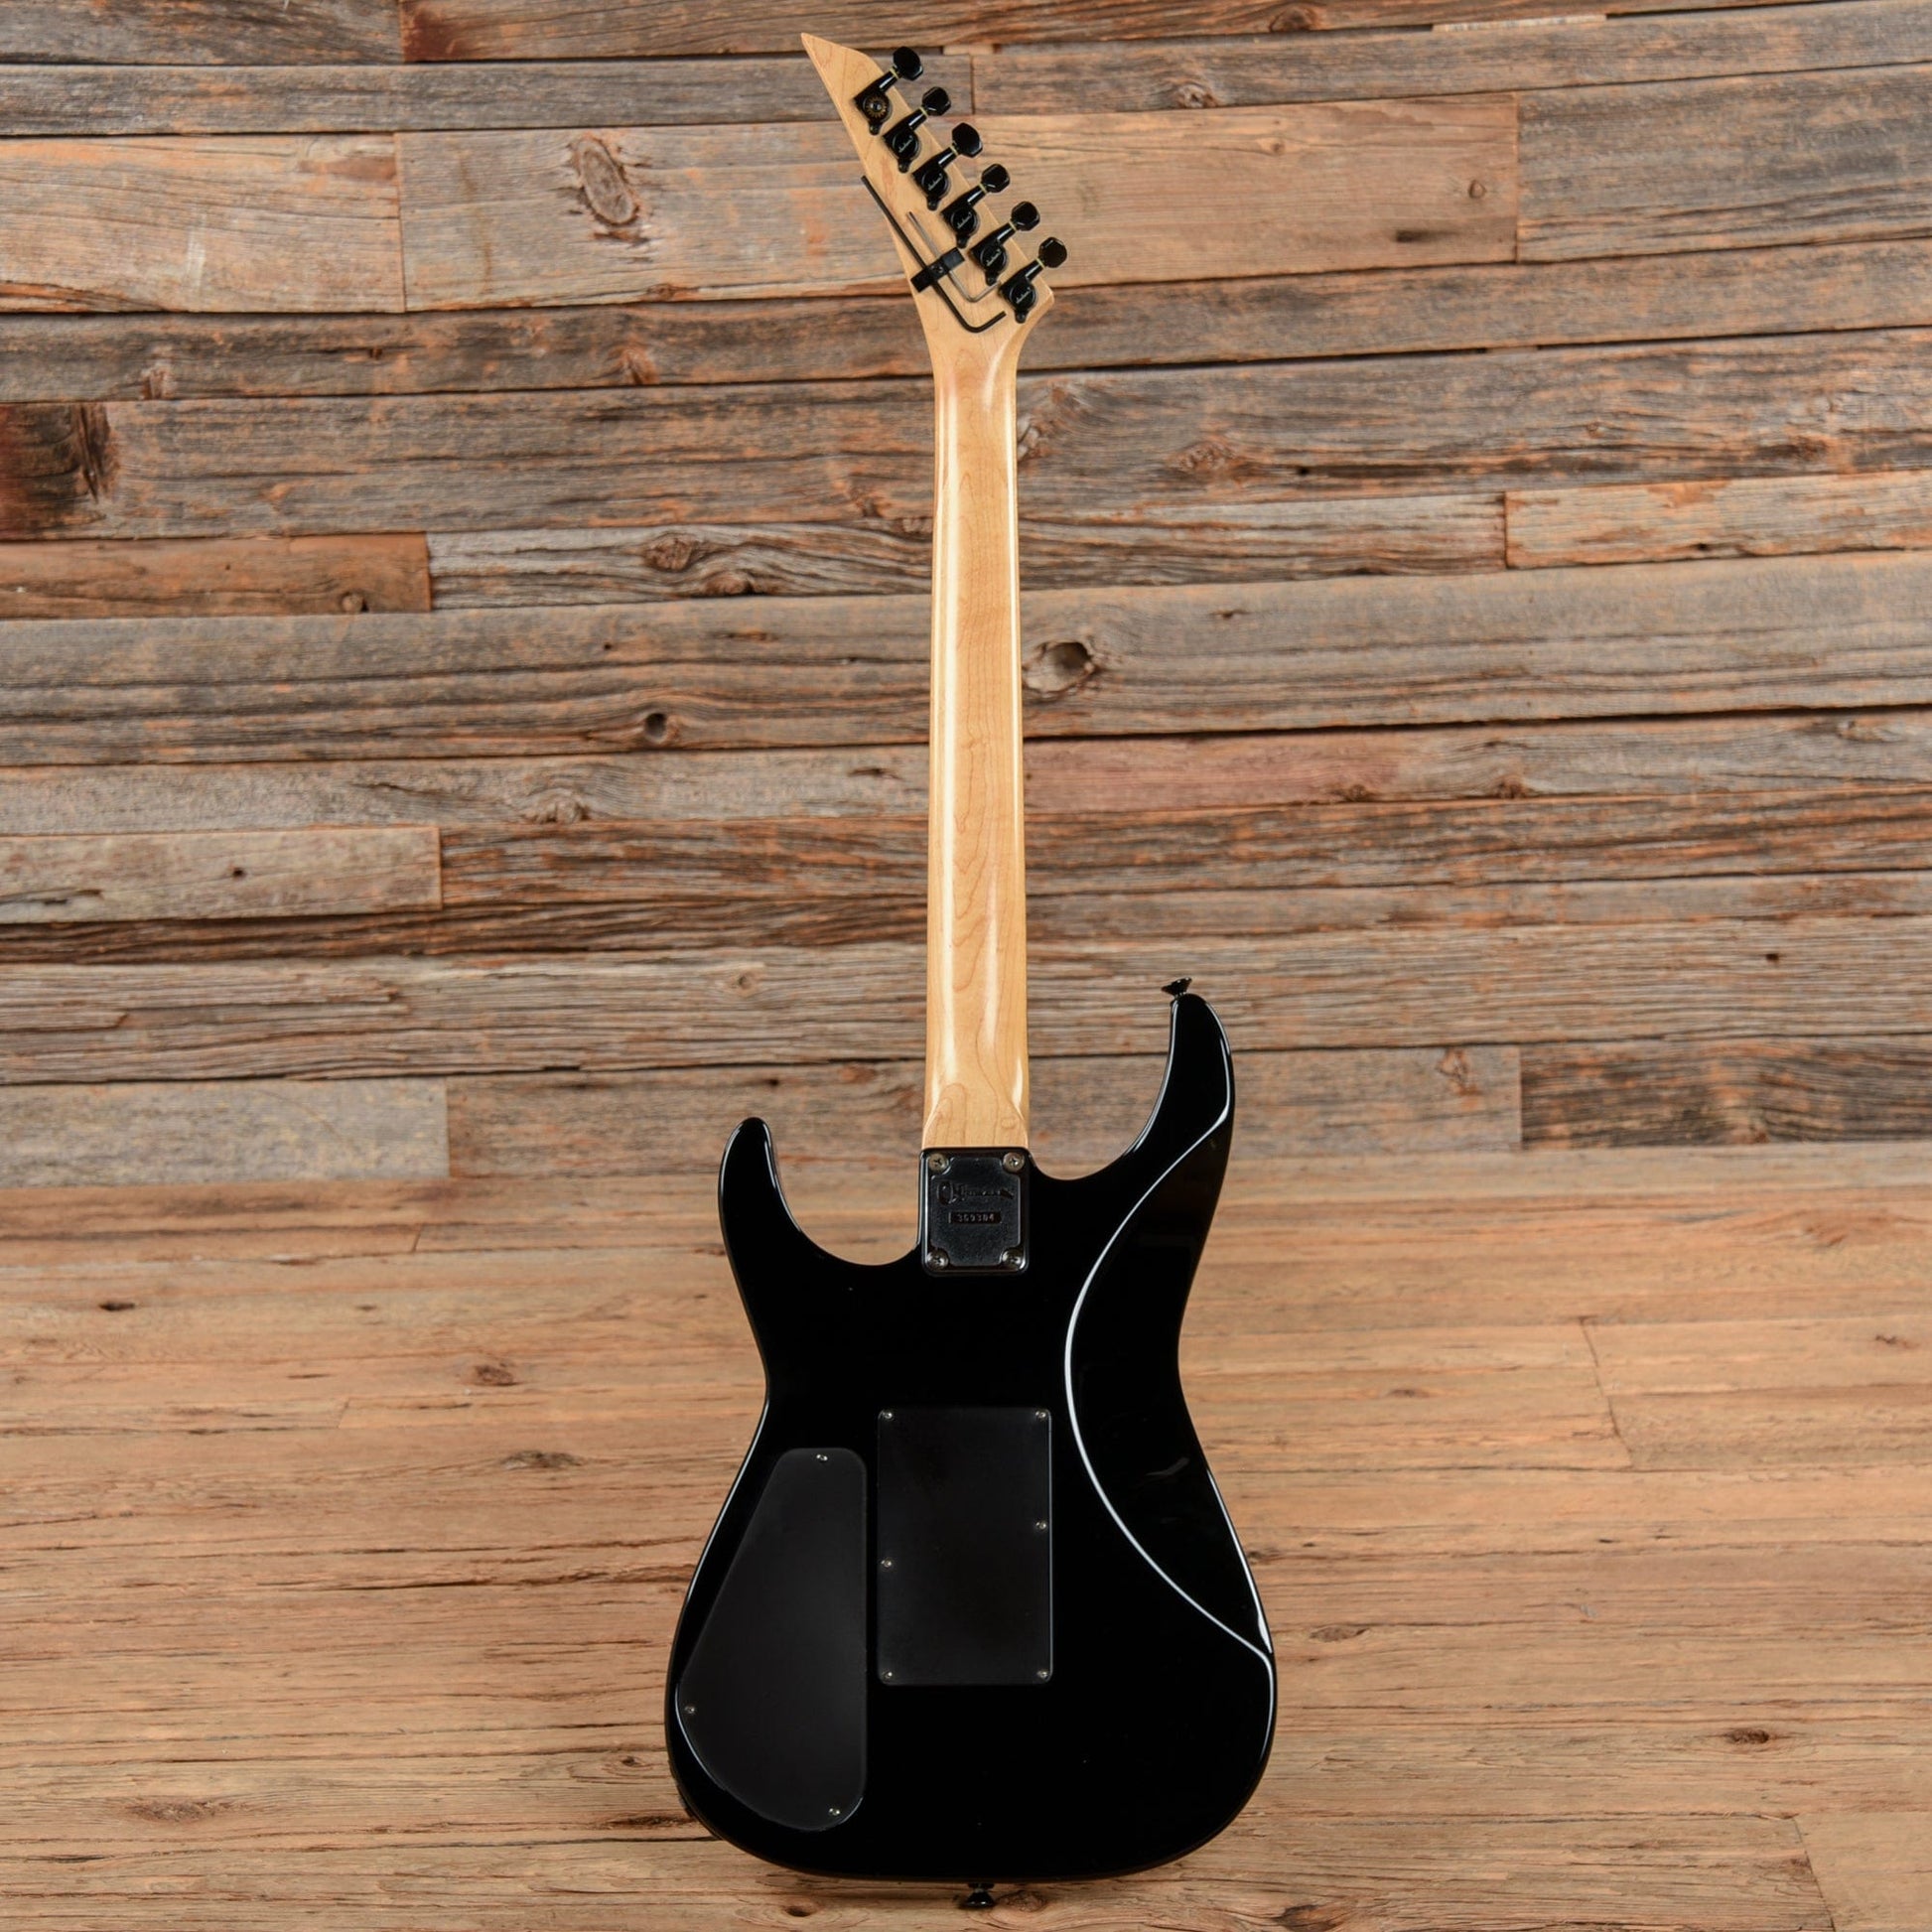 Charvel 275 Deluxe Black Electric Guitars / Solid Body